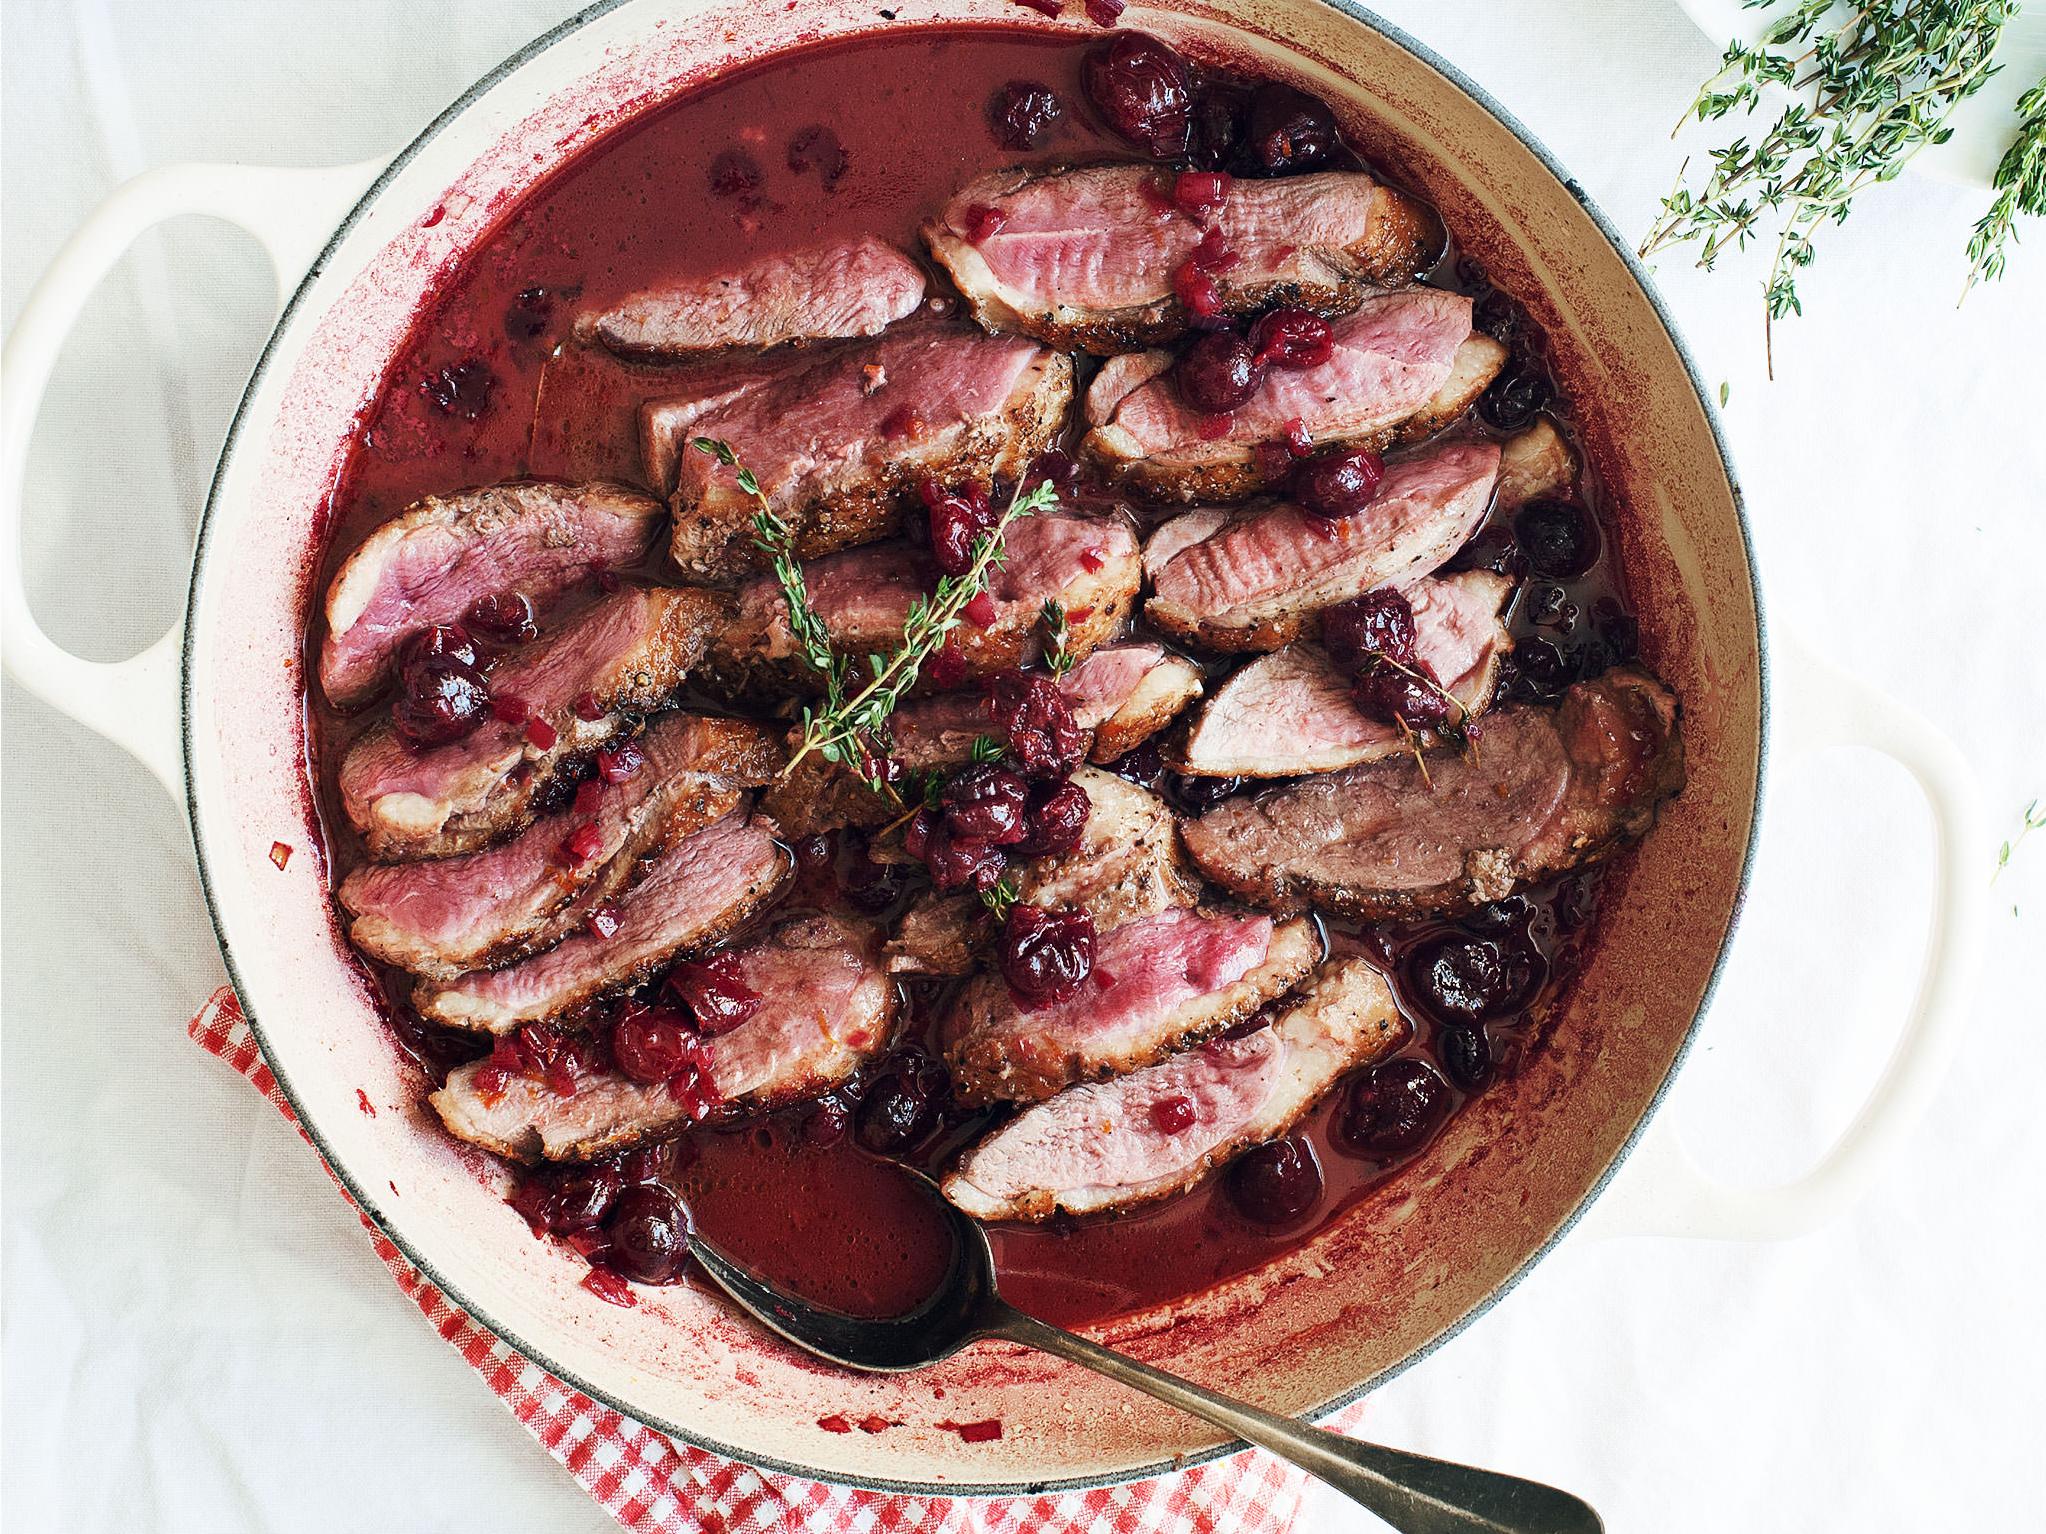  If you want a showstopper dish for a special occasion, this oak smoked duck breast is a must-try.